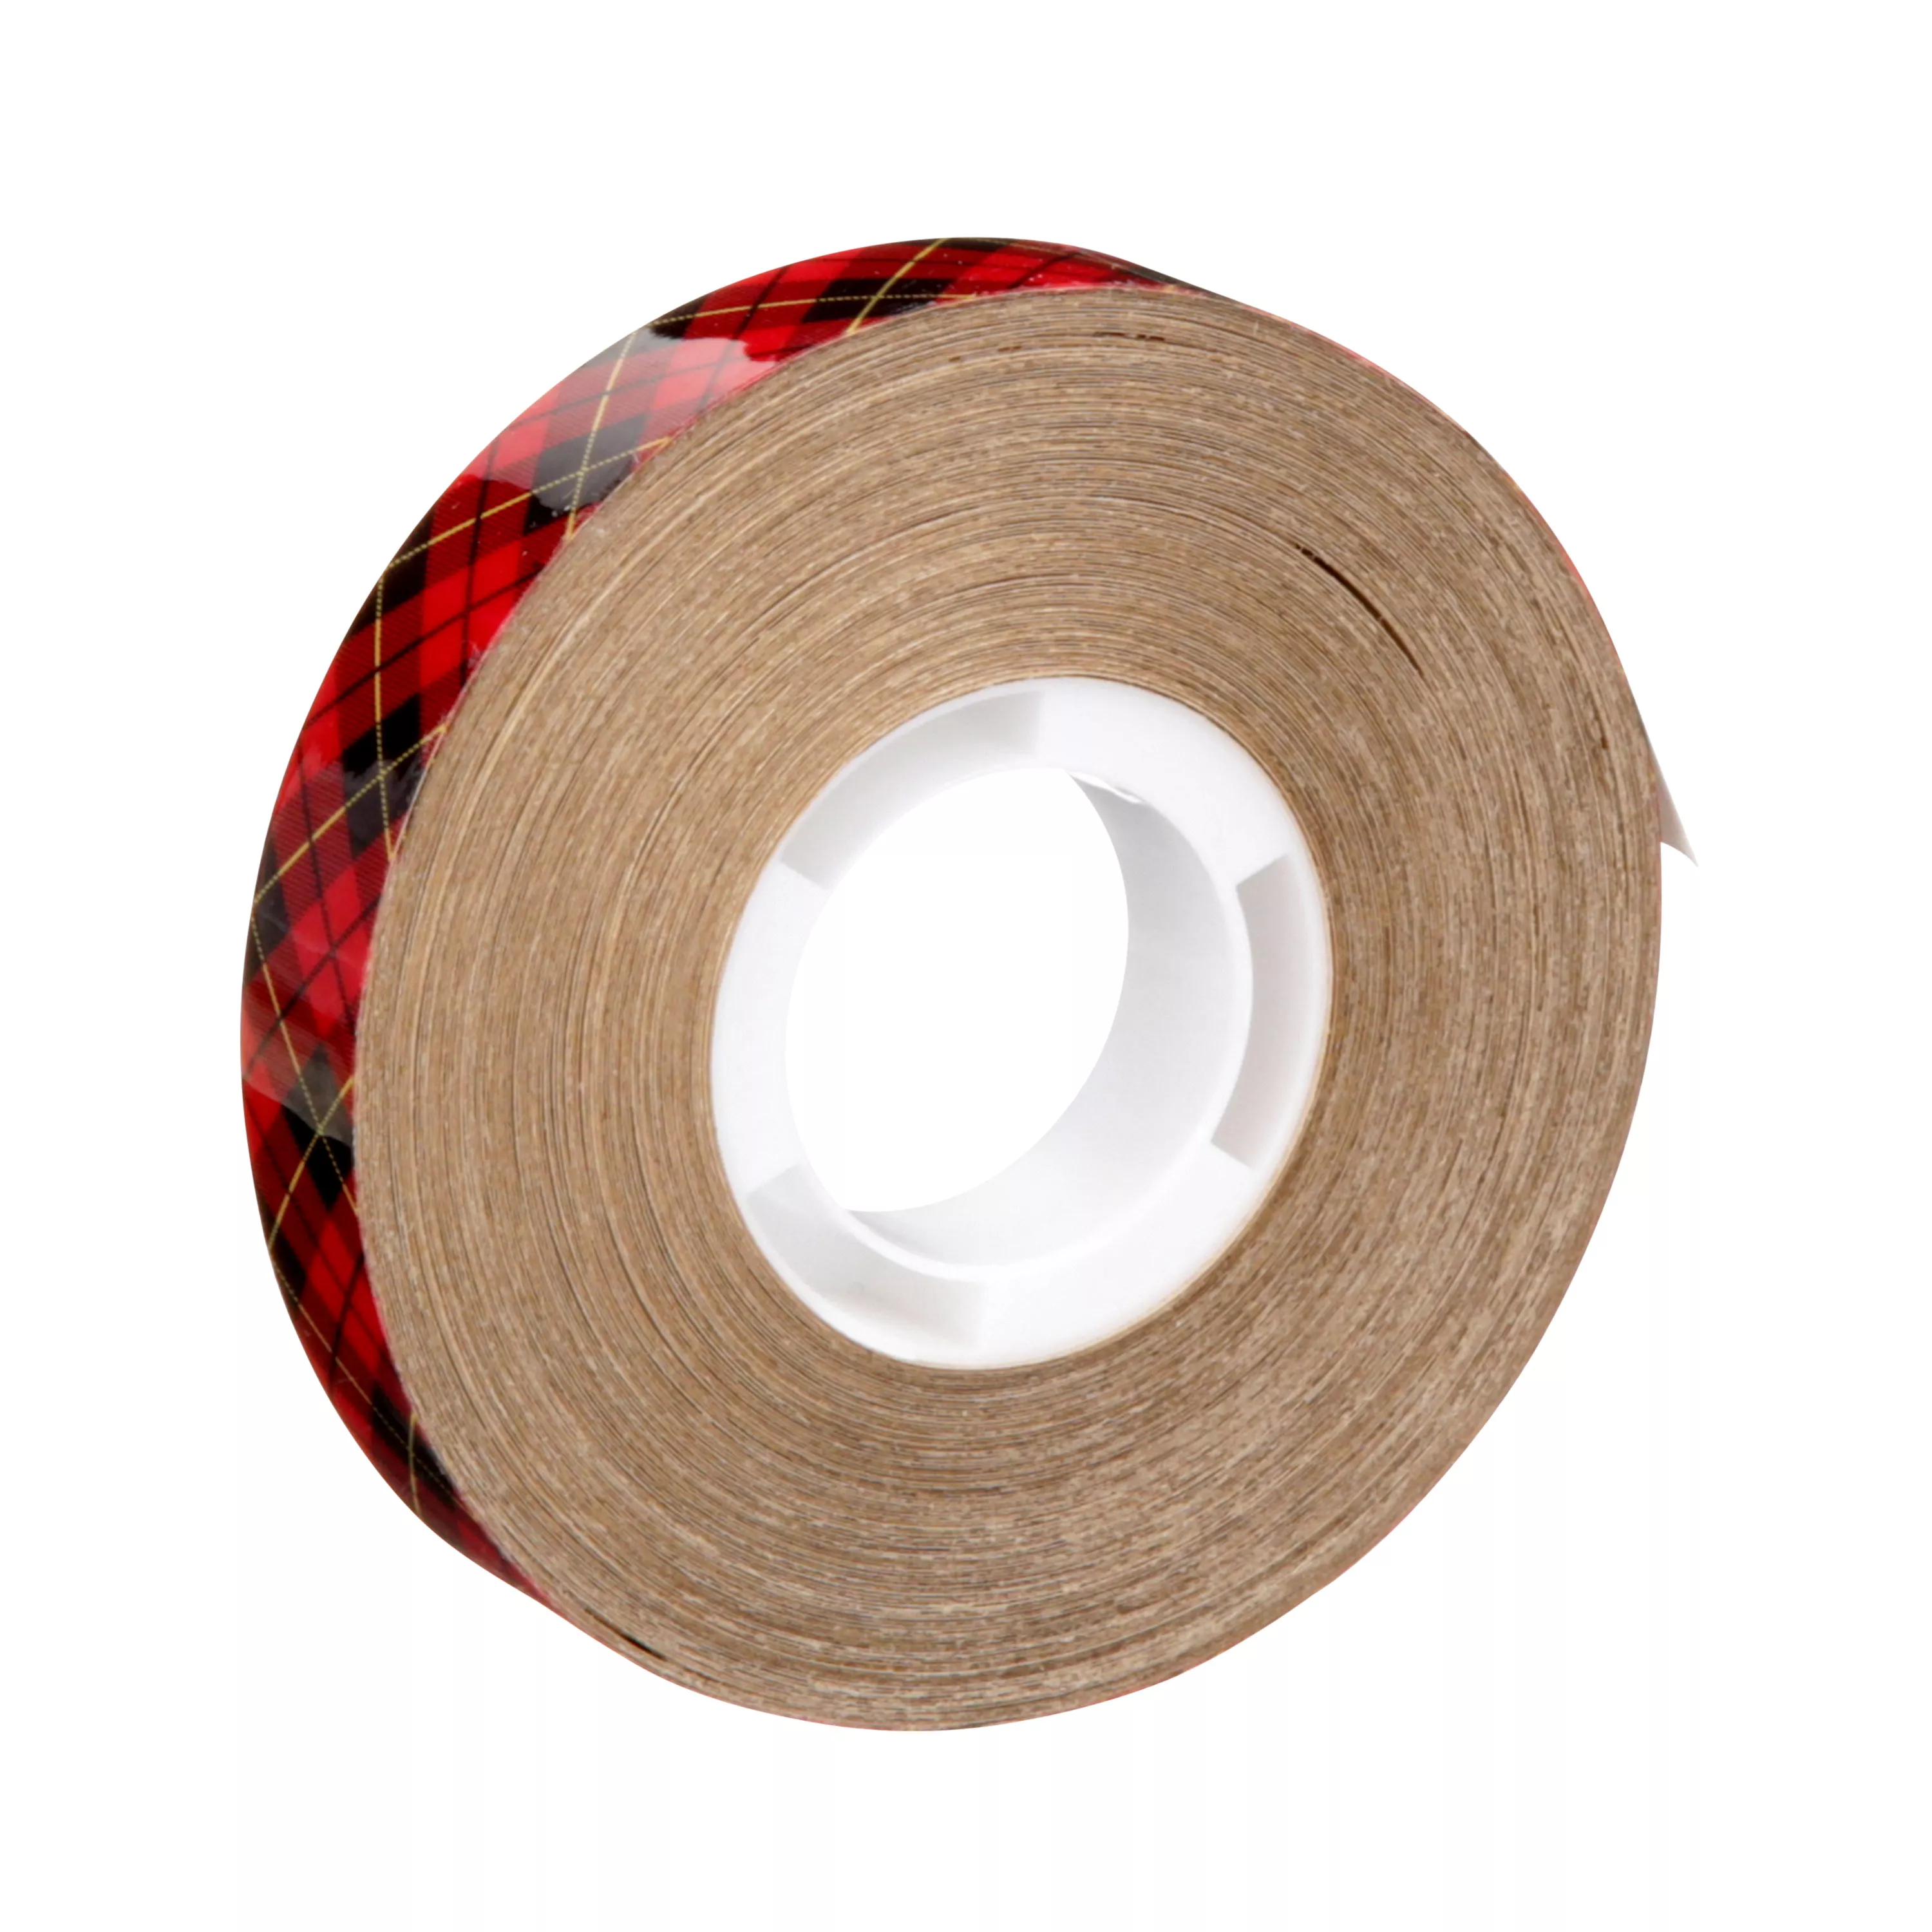 Scotch® ATG Adhesive Transfer Tape 969, Clear, 1/2 in x 18 yd, 5 mil,
(12 Roll/Carton) 72 Roll/Case